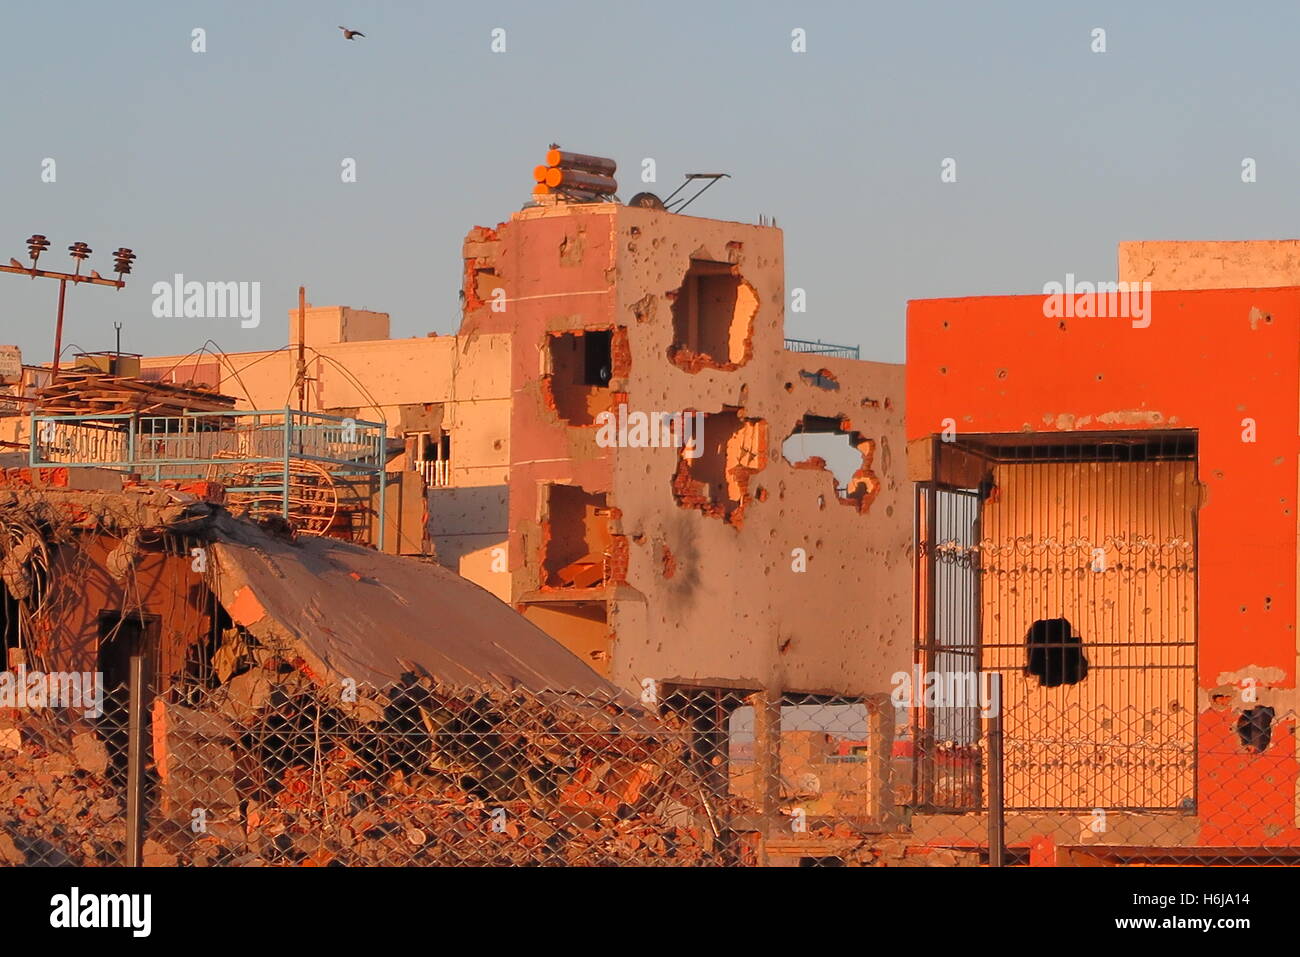 Nusaybin, Turkey. 20th Oct, 2016. View of the destroyed and closed down district Abdul Qadir Pasha in Nusaybin, Turkey, 20 October 2016. Whole districts of Kurdish cities in Turkey are destroyed, the displaced fear the upcoming winter. Fear, anger and hopelesness reign amongst the Kurds, as hardly anybody is interested in their fate. PHOTO: CAN MEREY/dpa/Alamy Live News Stock Photo